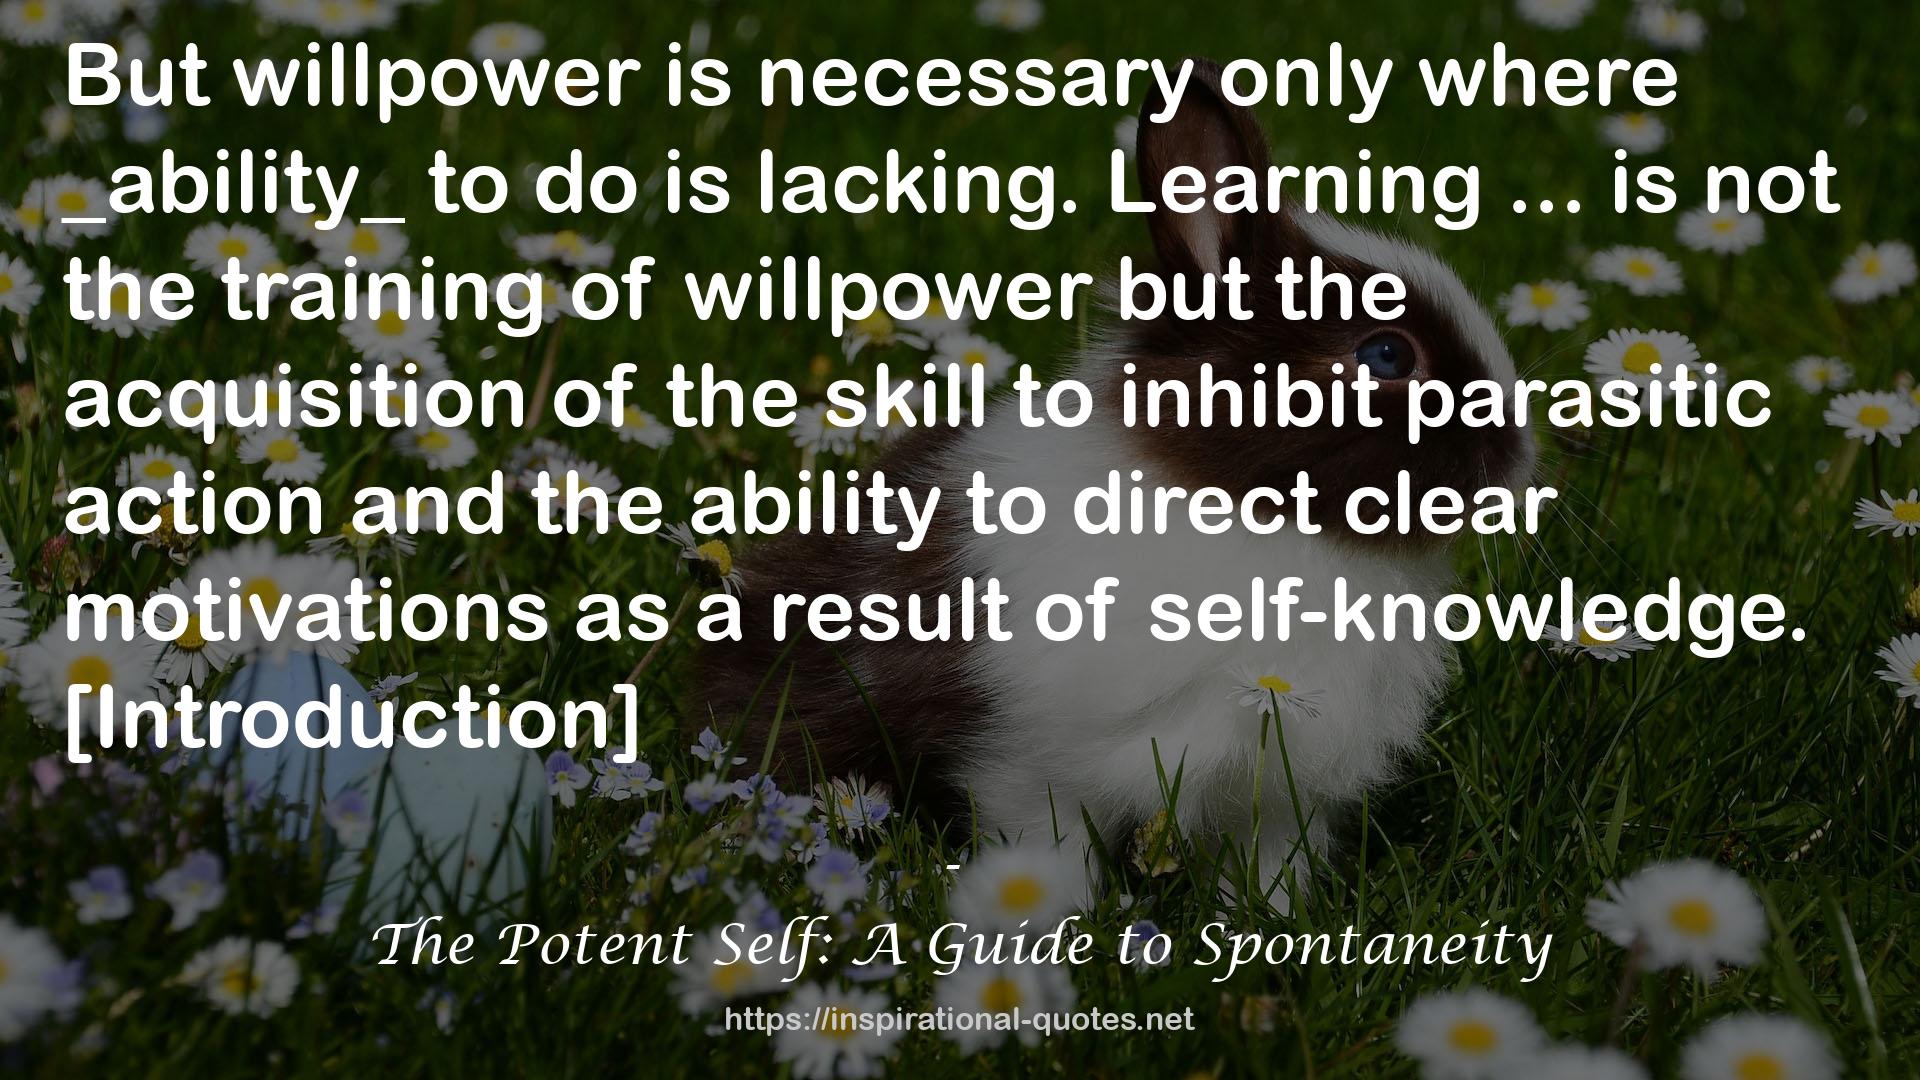 The Potent Self: A Guide to Spontaneity QUOTES